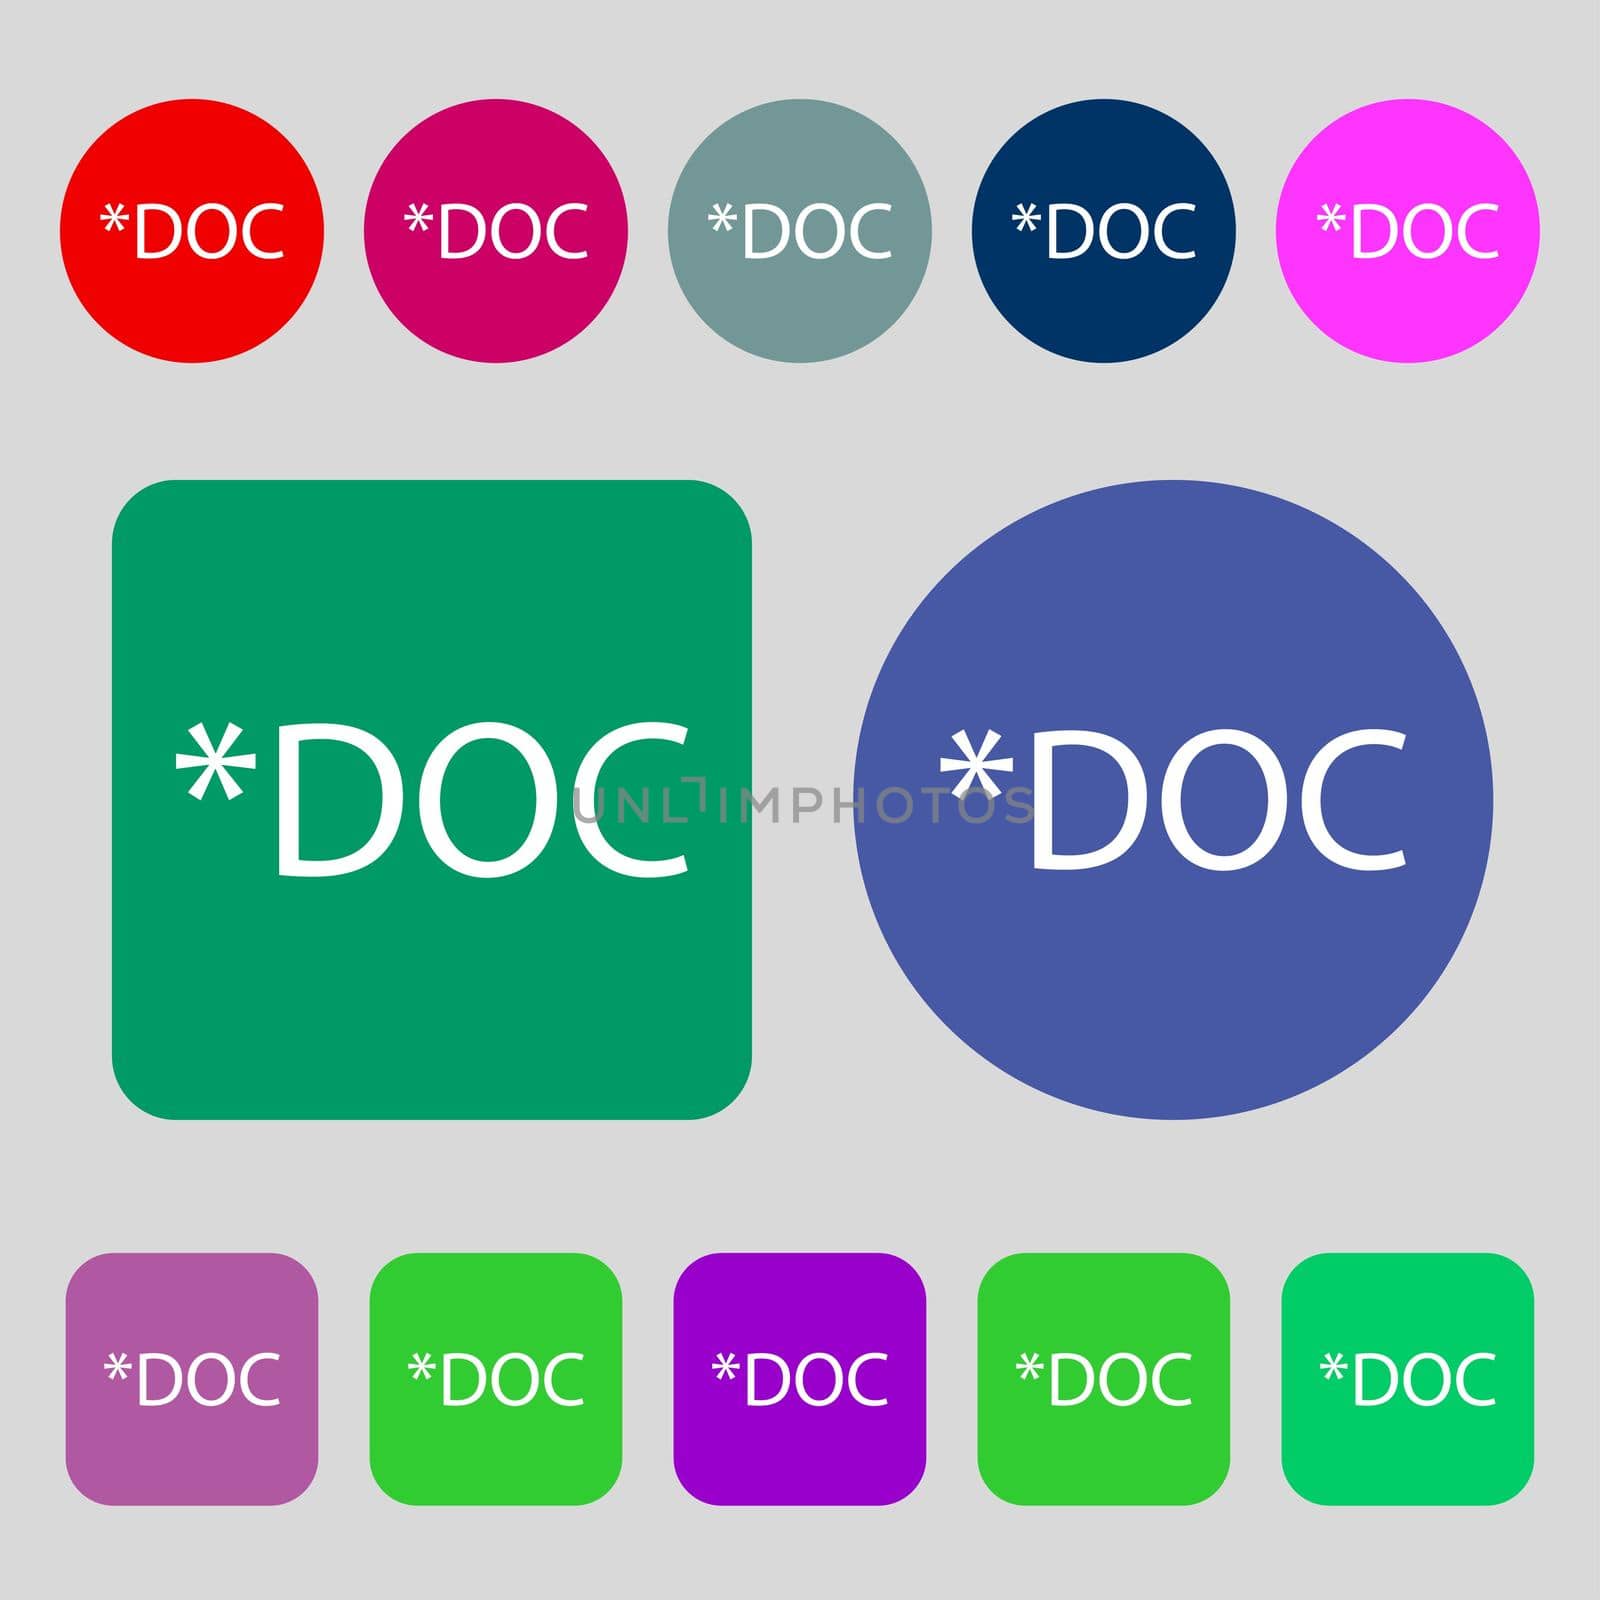 File document icon. Download doc button. Doc file extension symbol. 12 colored buttons. Flat design.  by serhii_lohvyniuk